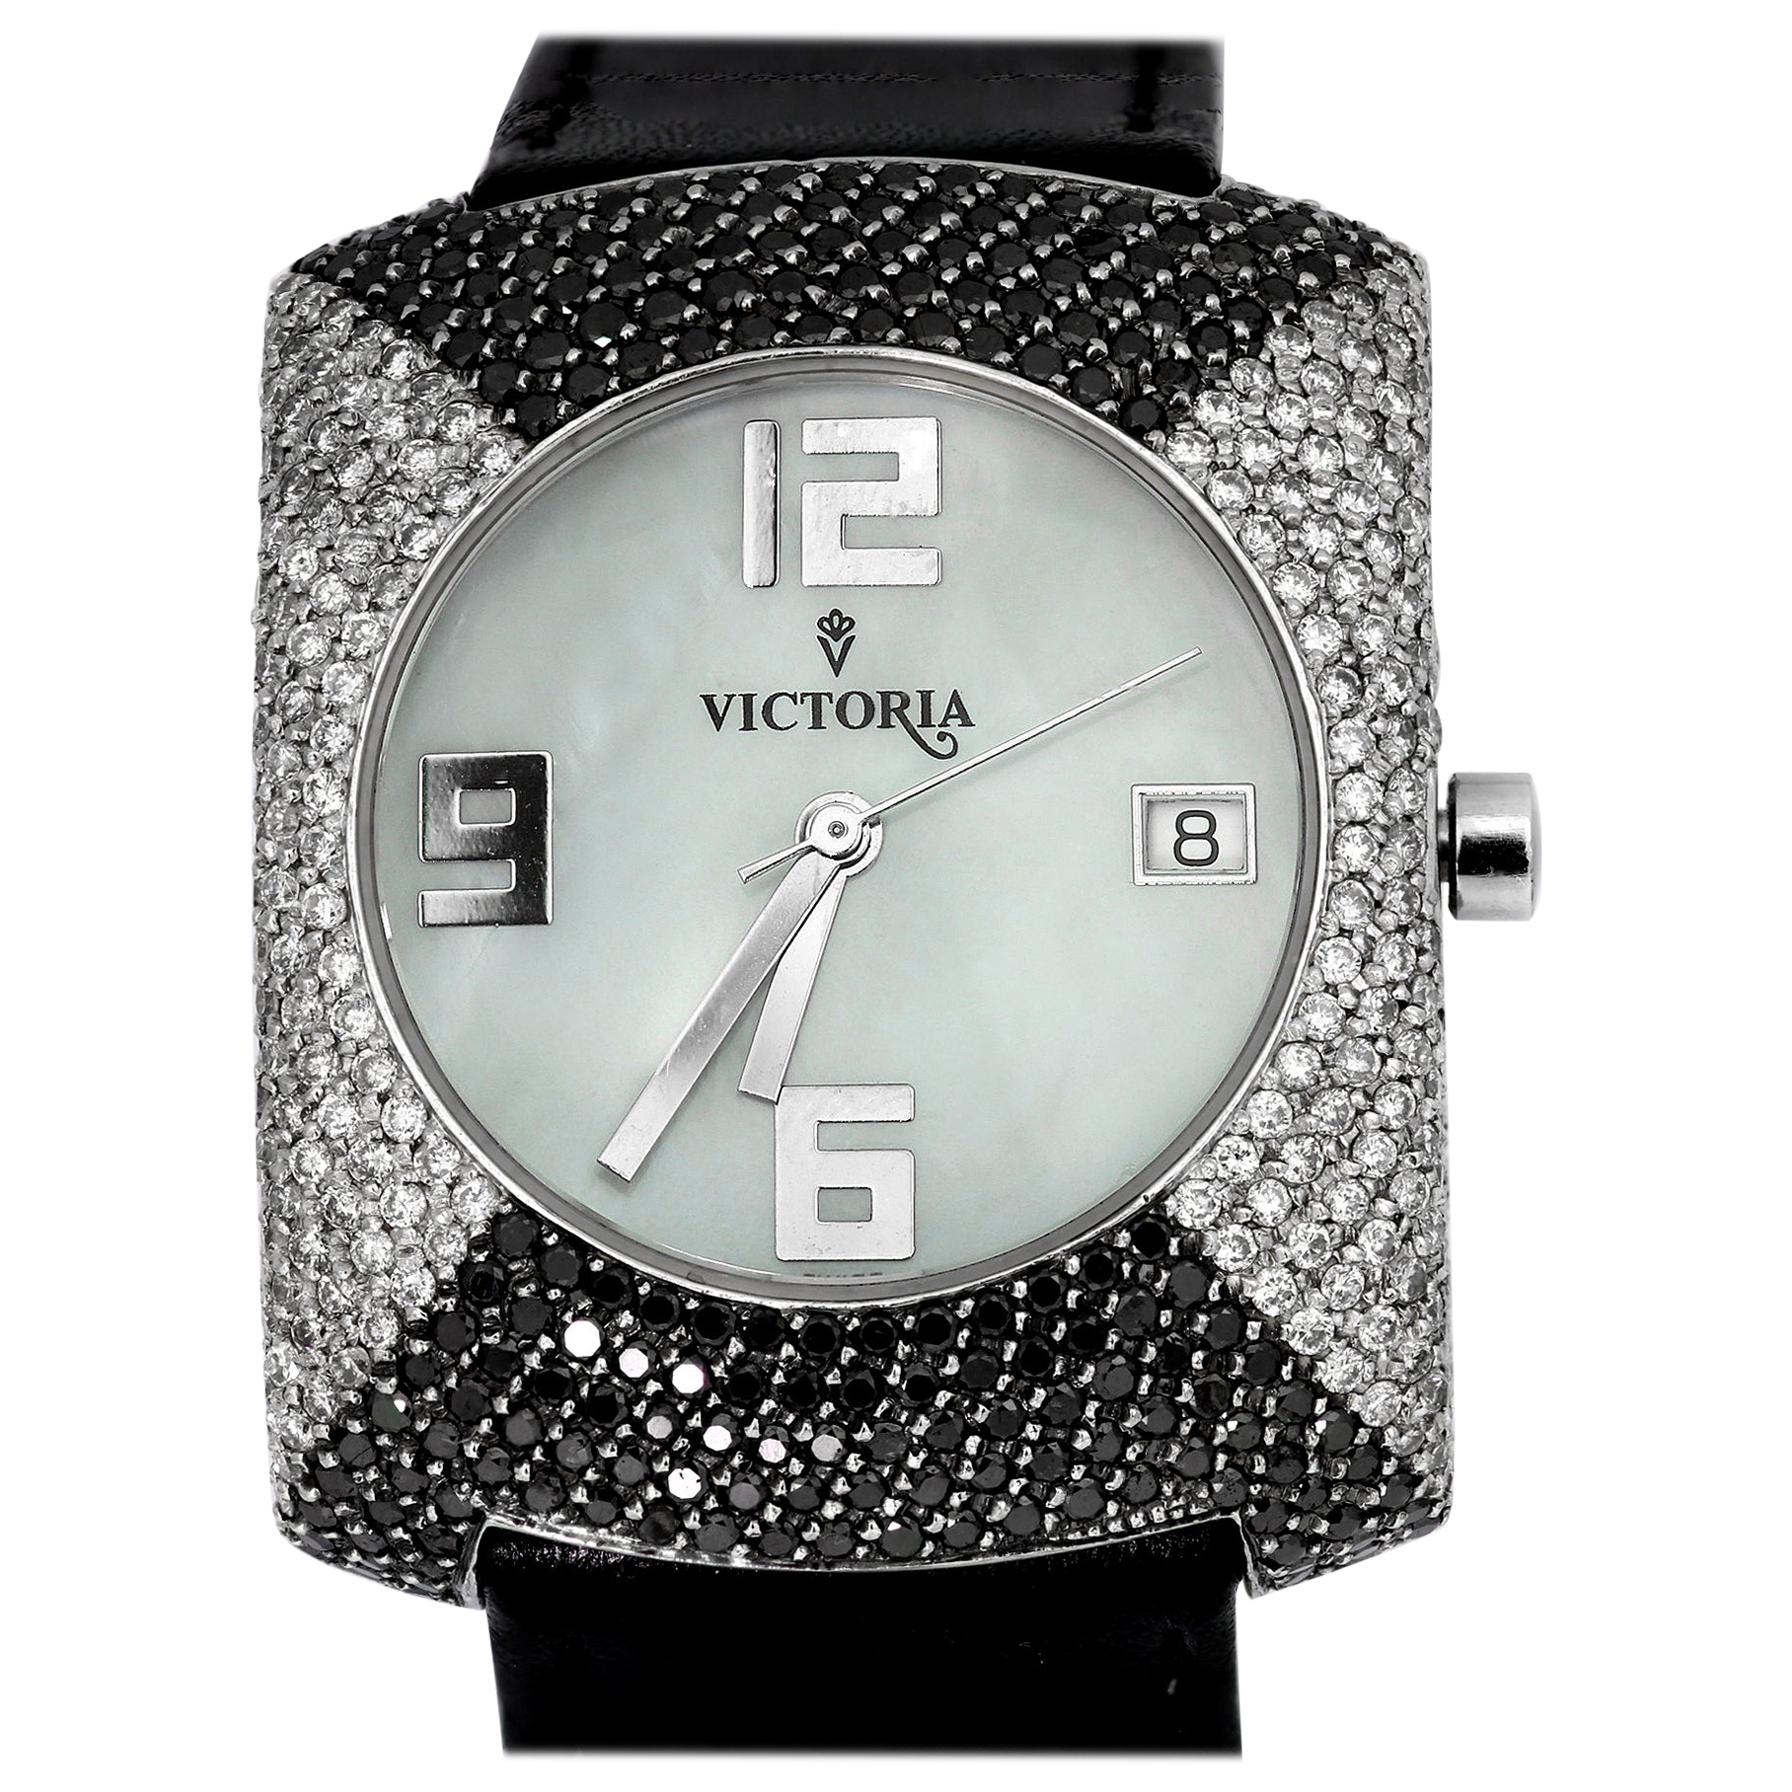 Victoria Strap Watch, Black and White Diamonds, Ladies, Mother of Pearl, Swiss